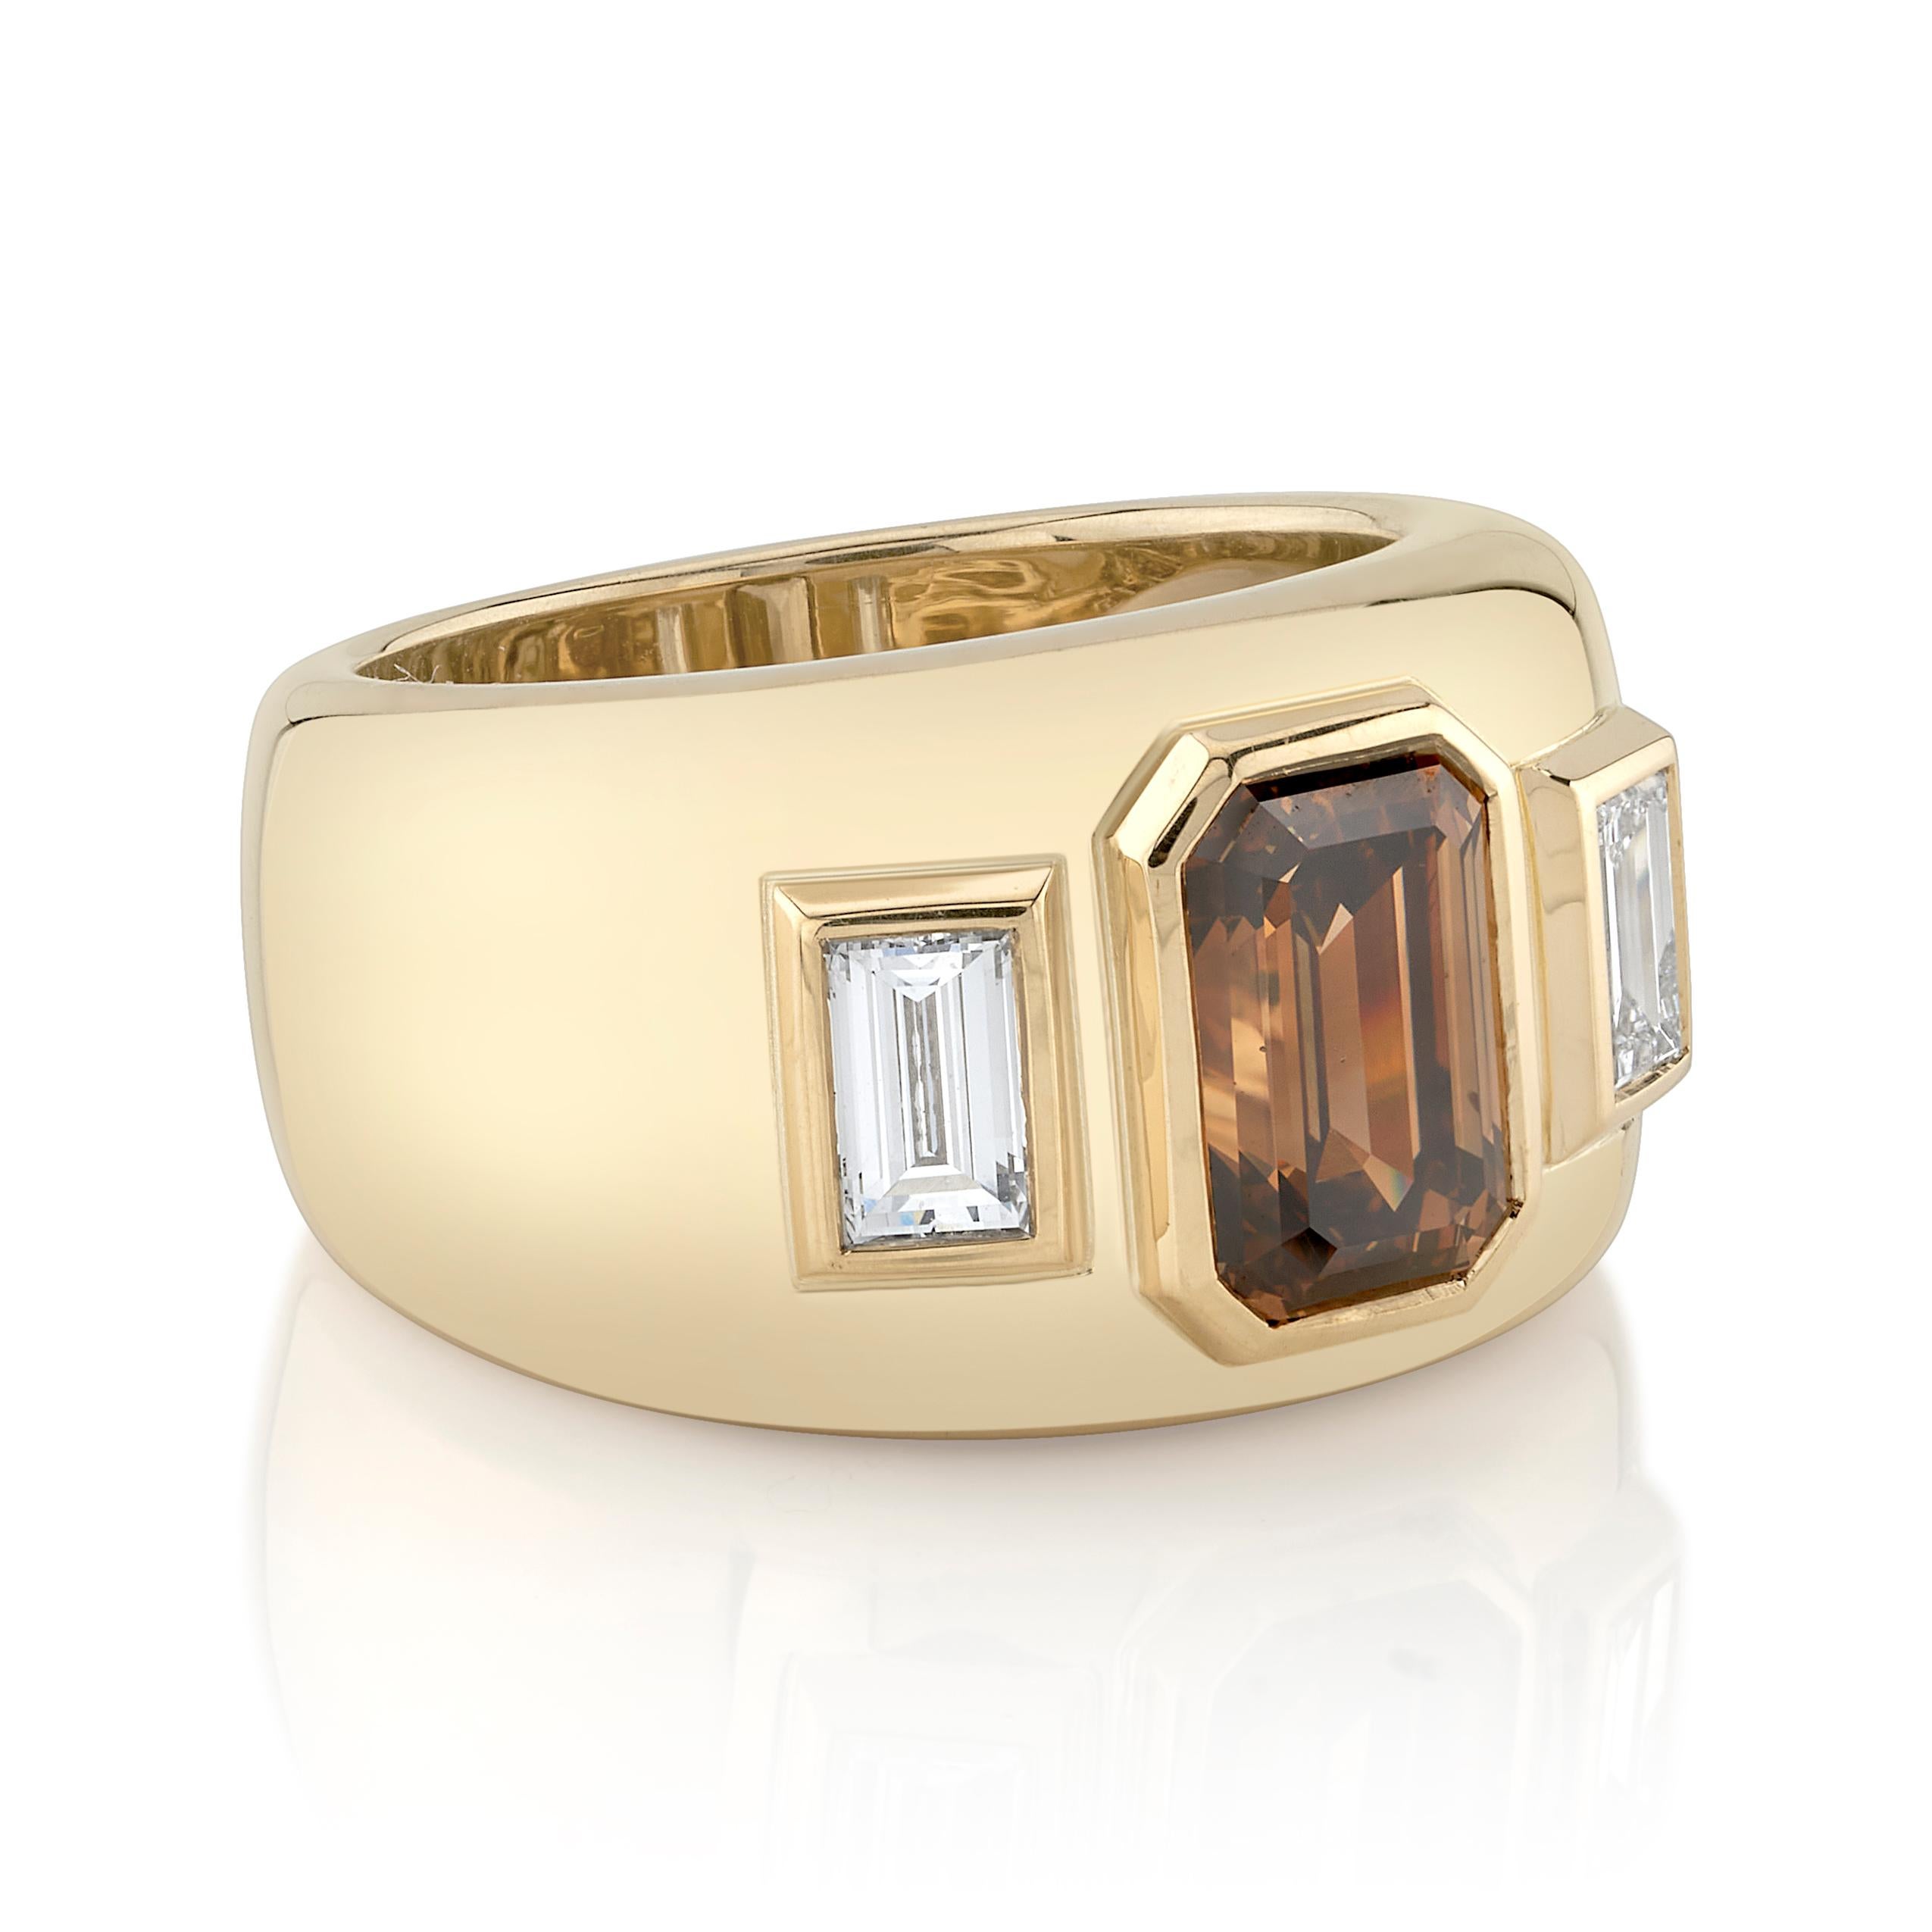 2.34ct Fancy Dark Orange Brown/SI2 GIA certified emerald cut diamond with 0.62ctw baguette cut accent diamonds set in a handcrafted 18K yellow gold mounting.

